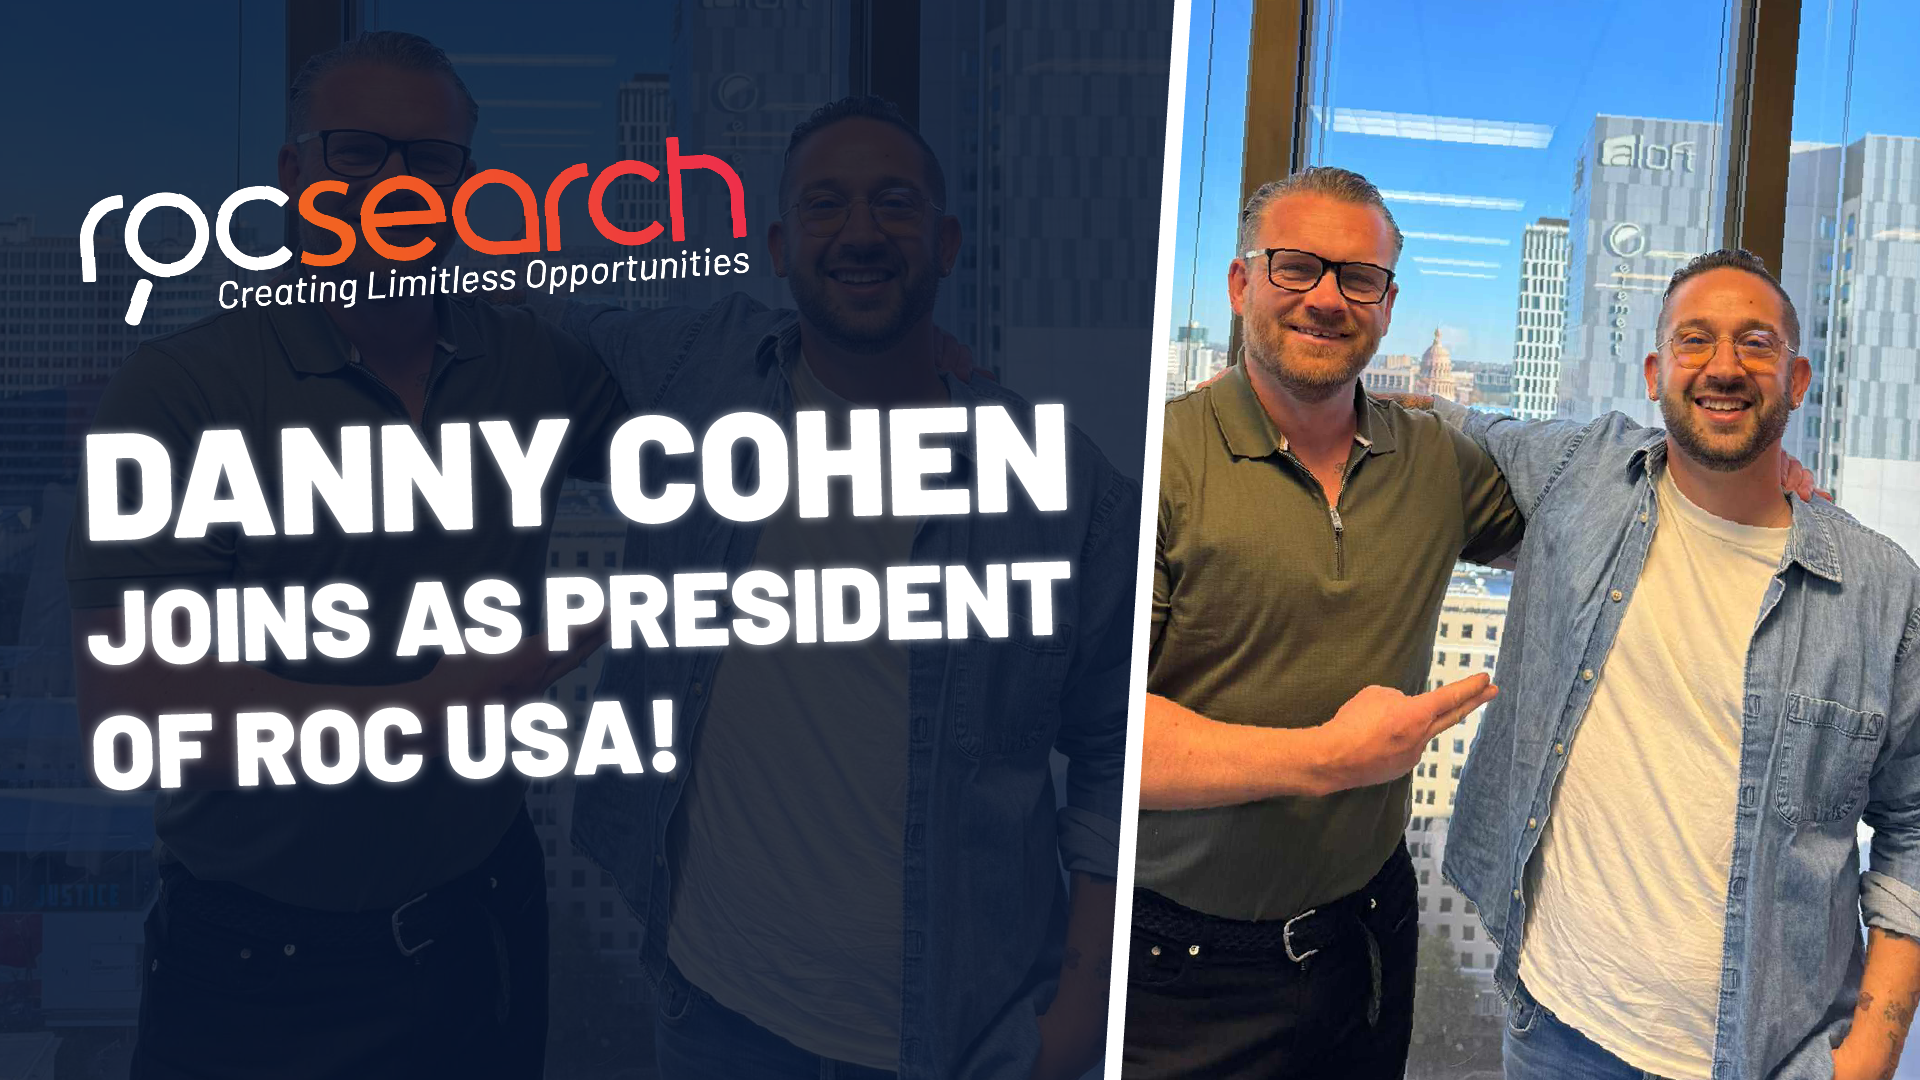 Danny Cohen joins as President of Roc USA!